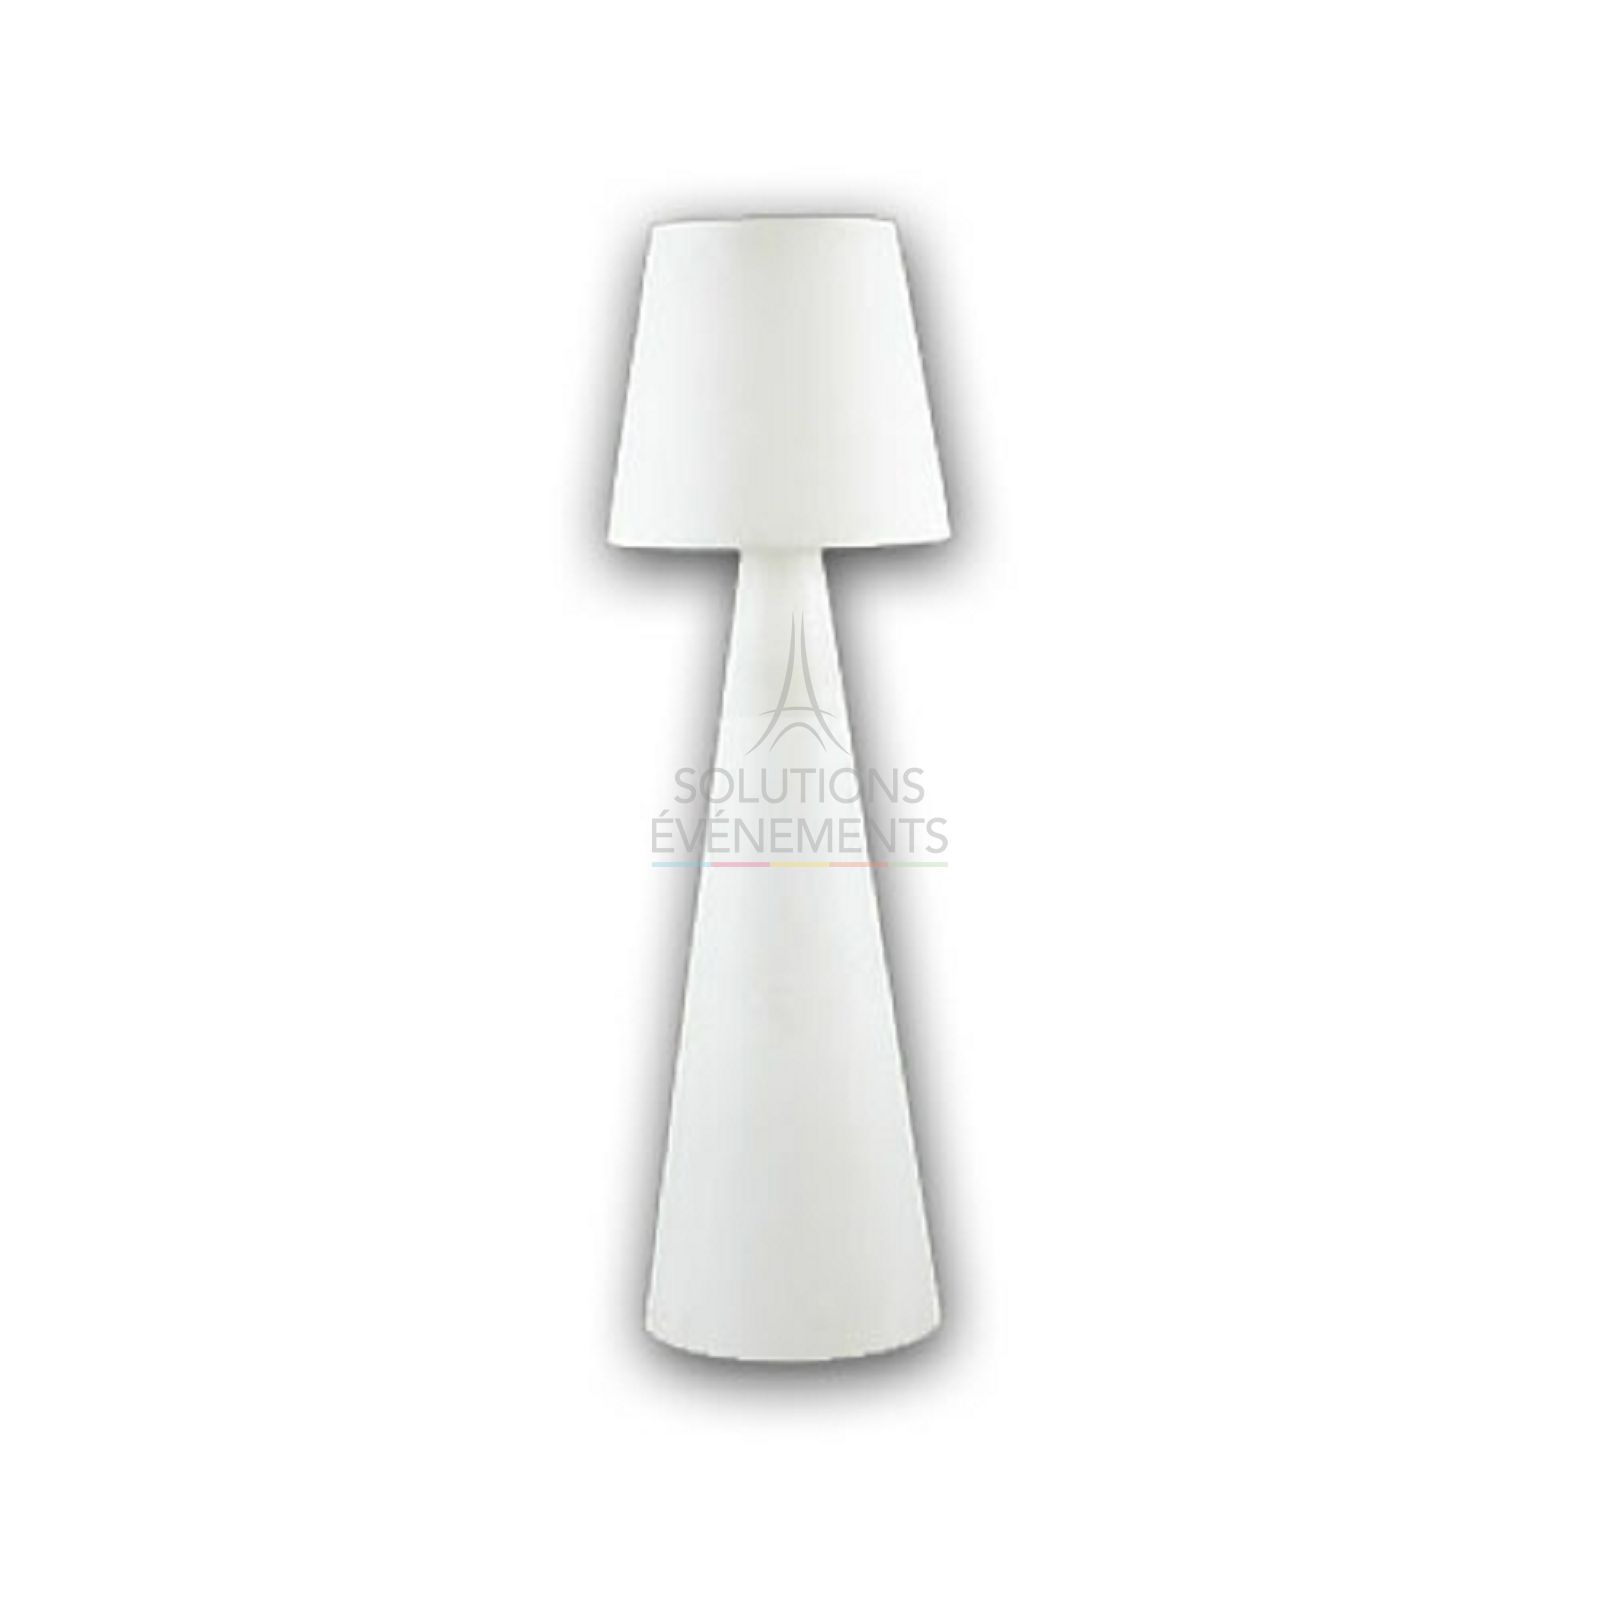 Rental of giant lamp with a height of 2m